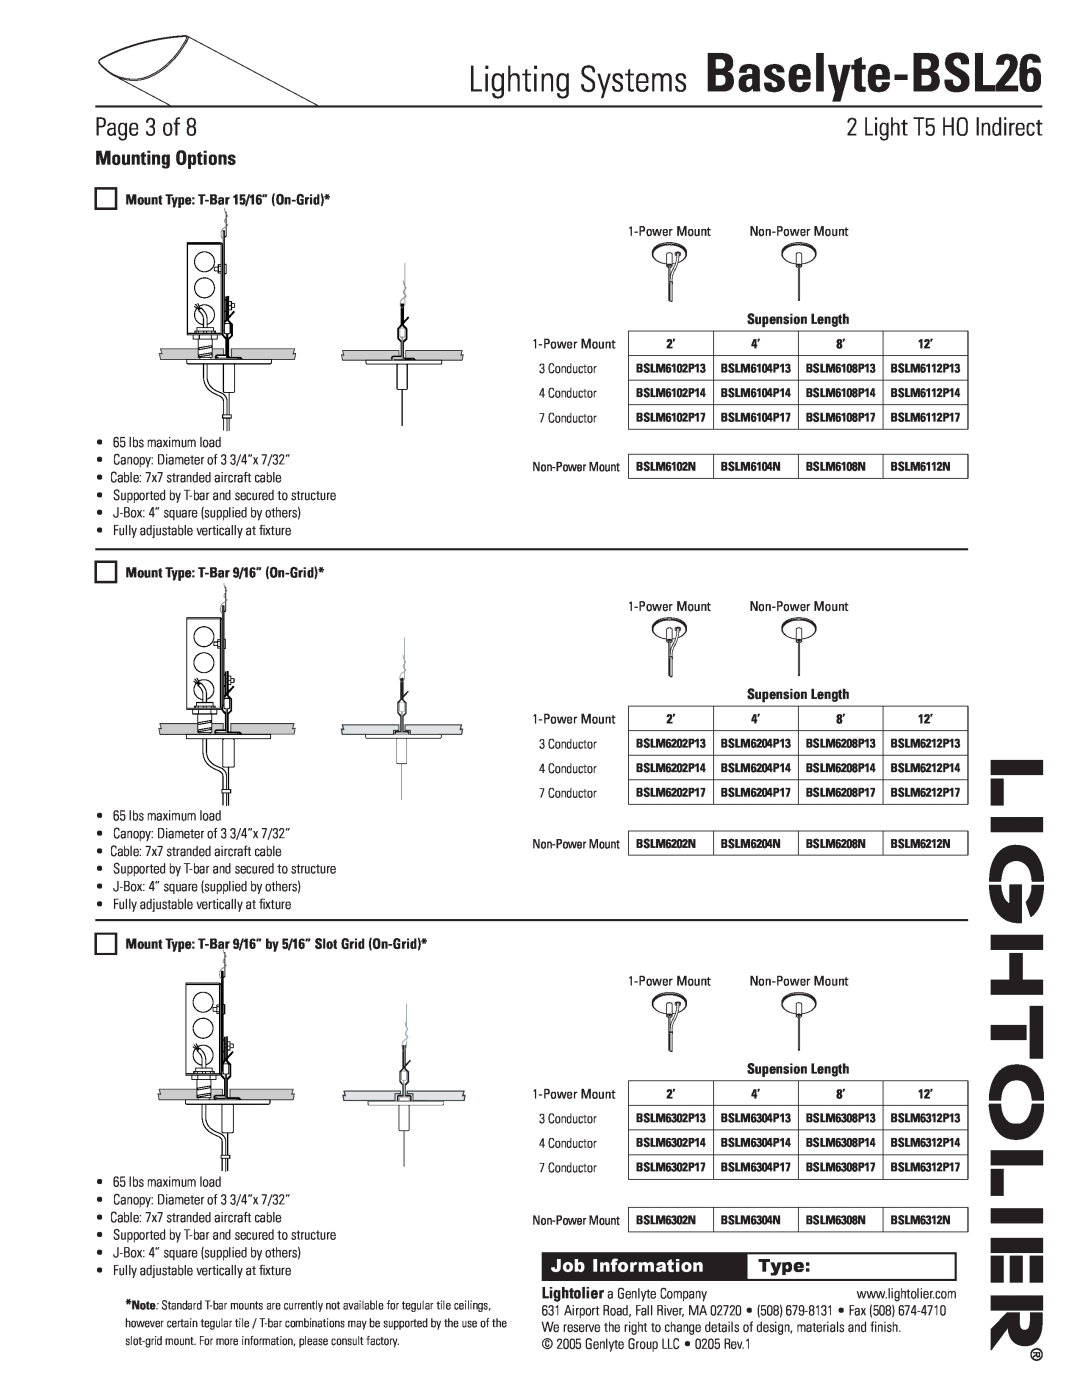 Lightolier Baselyte-BSL26 Mounting Options, Mount Type T-Bar15/16” On-Grid, Supension Length, Page of, Job Information 